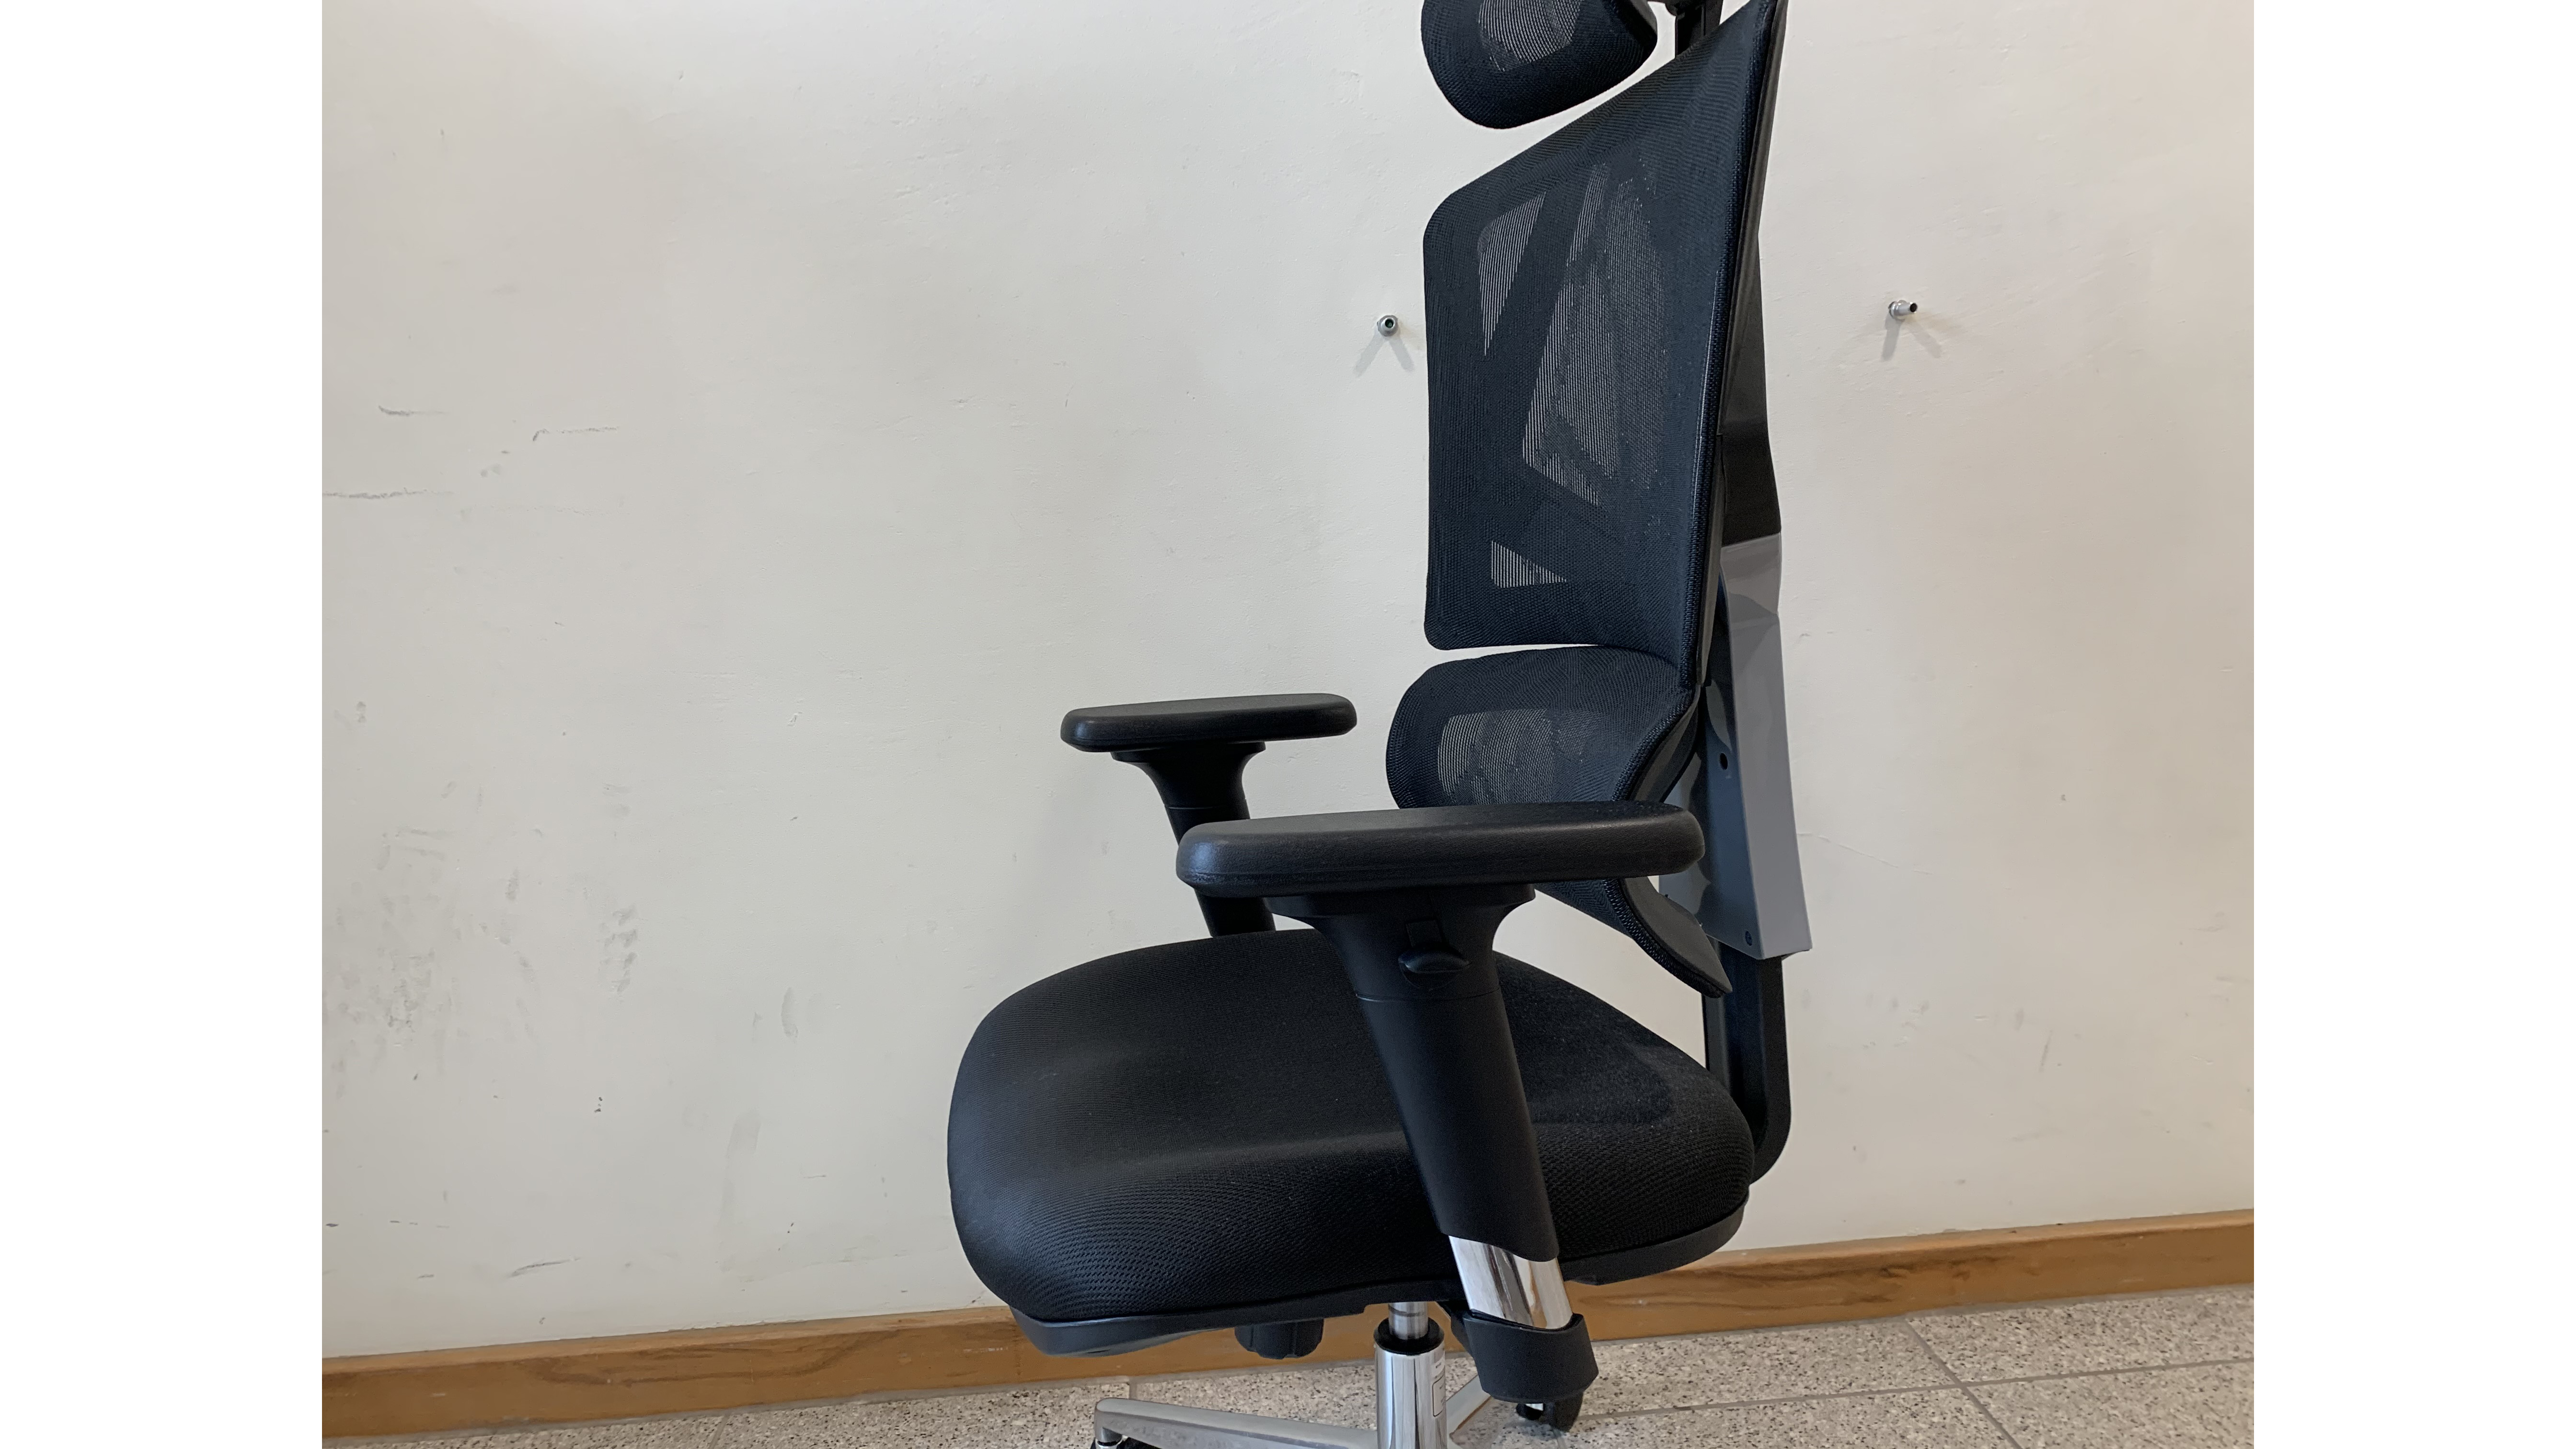 A side view of the Sihoo M90D chair.